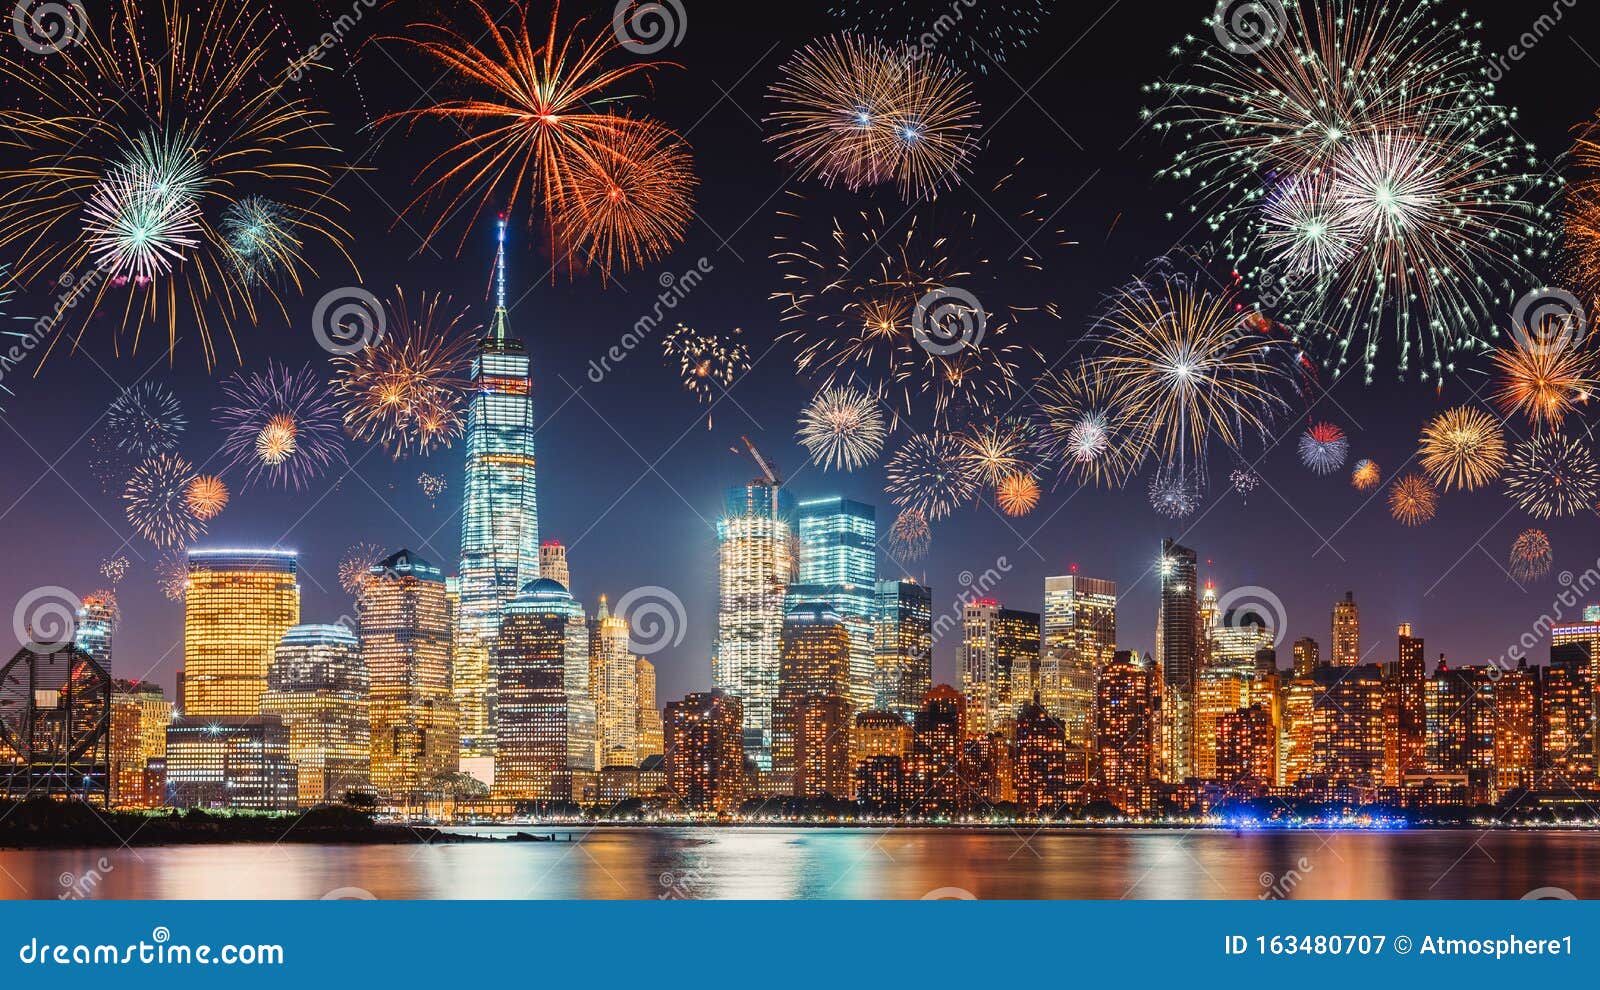 New Years Eve With Colorful Fireworks Over New York City Skyline Long